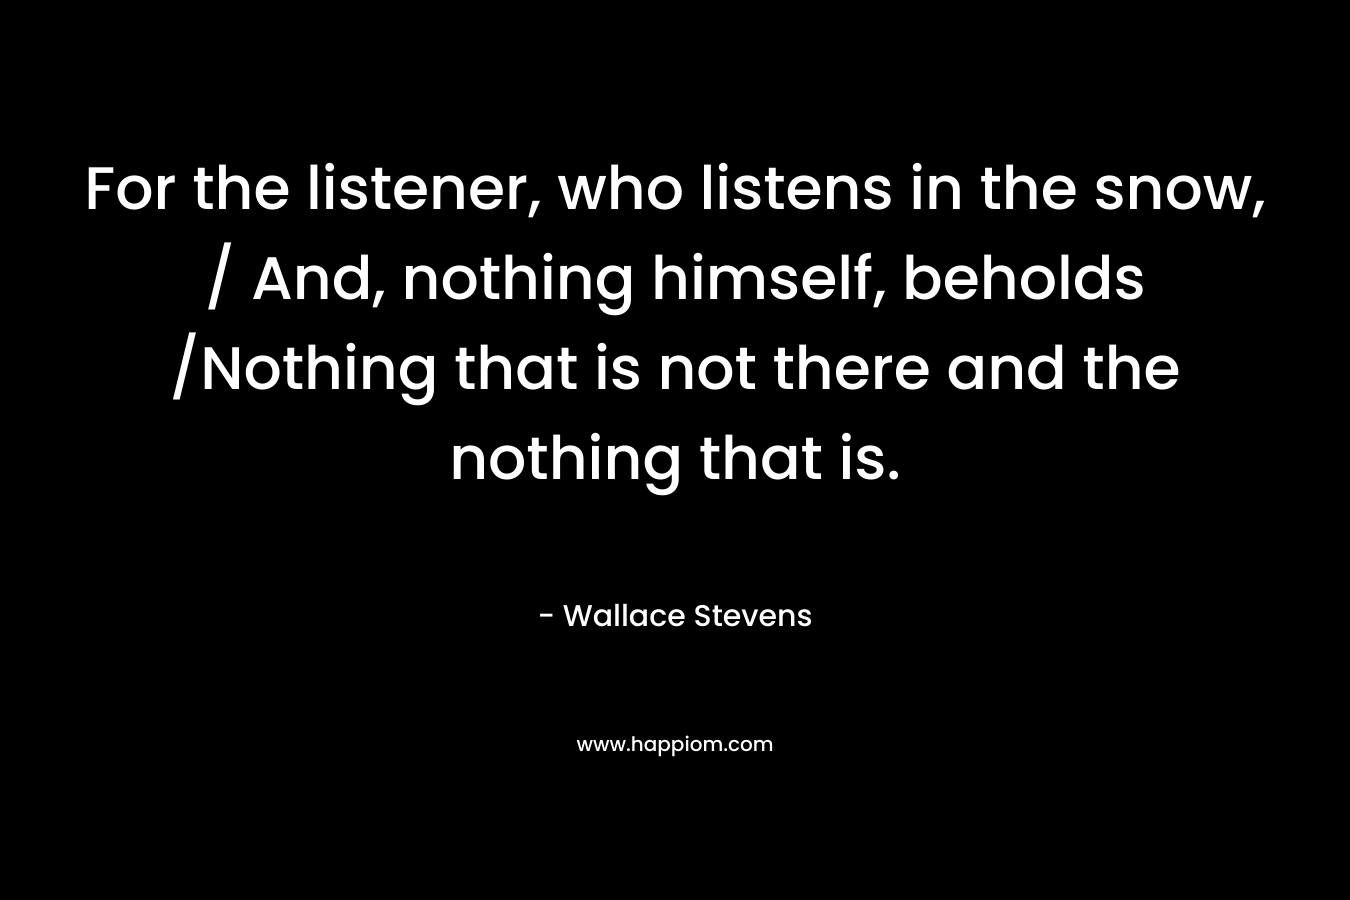 For the listener, who listens in the snow, / And, nothing himself, beholds /Nothing that is not there and the nothing that is. – Wallace Stevens